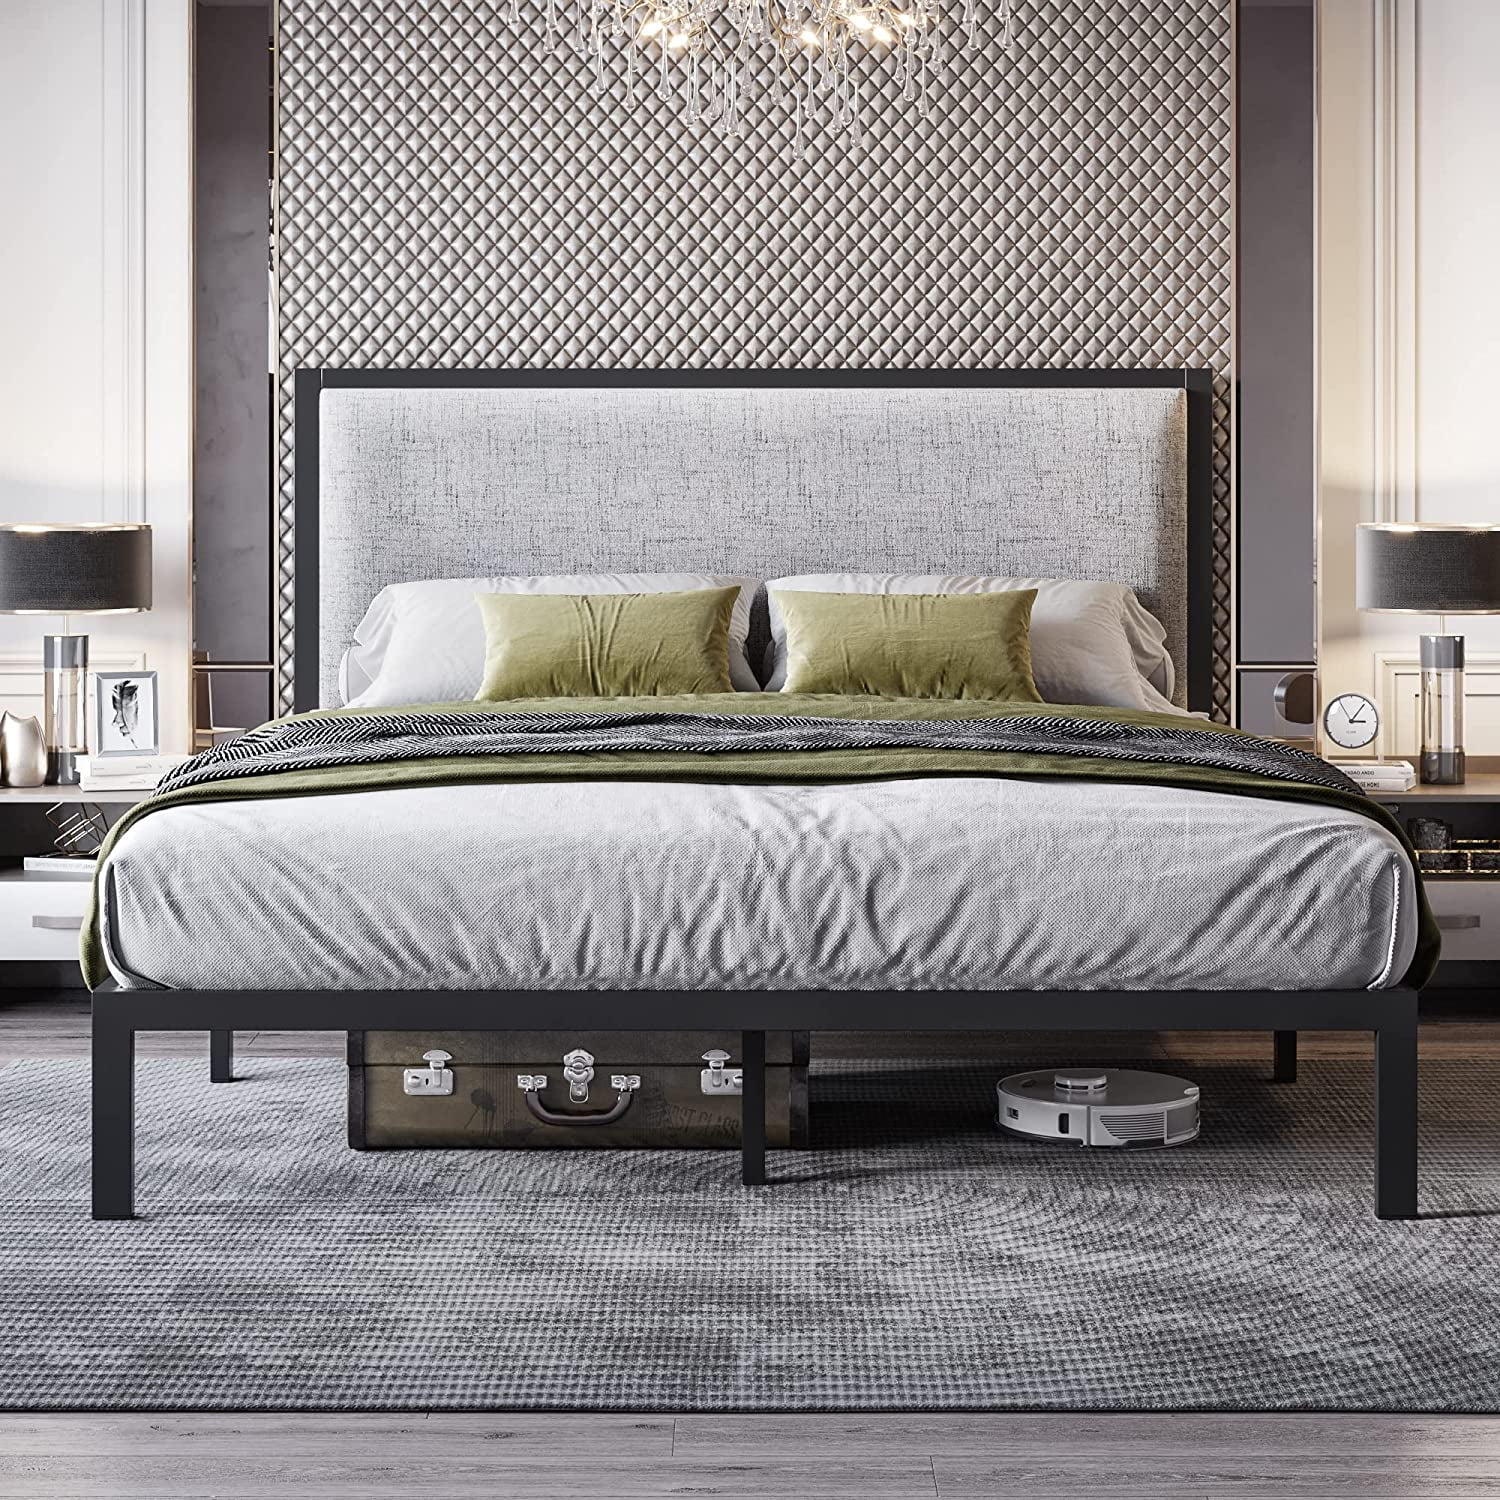 Allewie Full Size Metal Platform Bed Frame with Fabric Upholstered Headboard, Heavy Duty Steel Structure, Grey